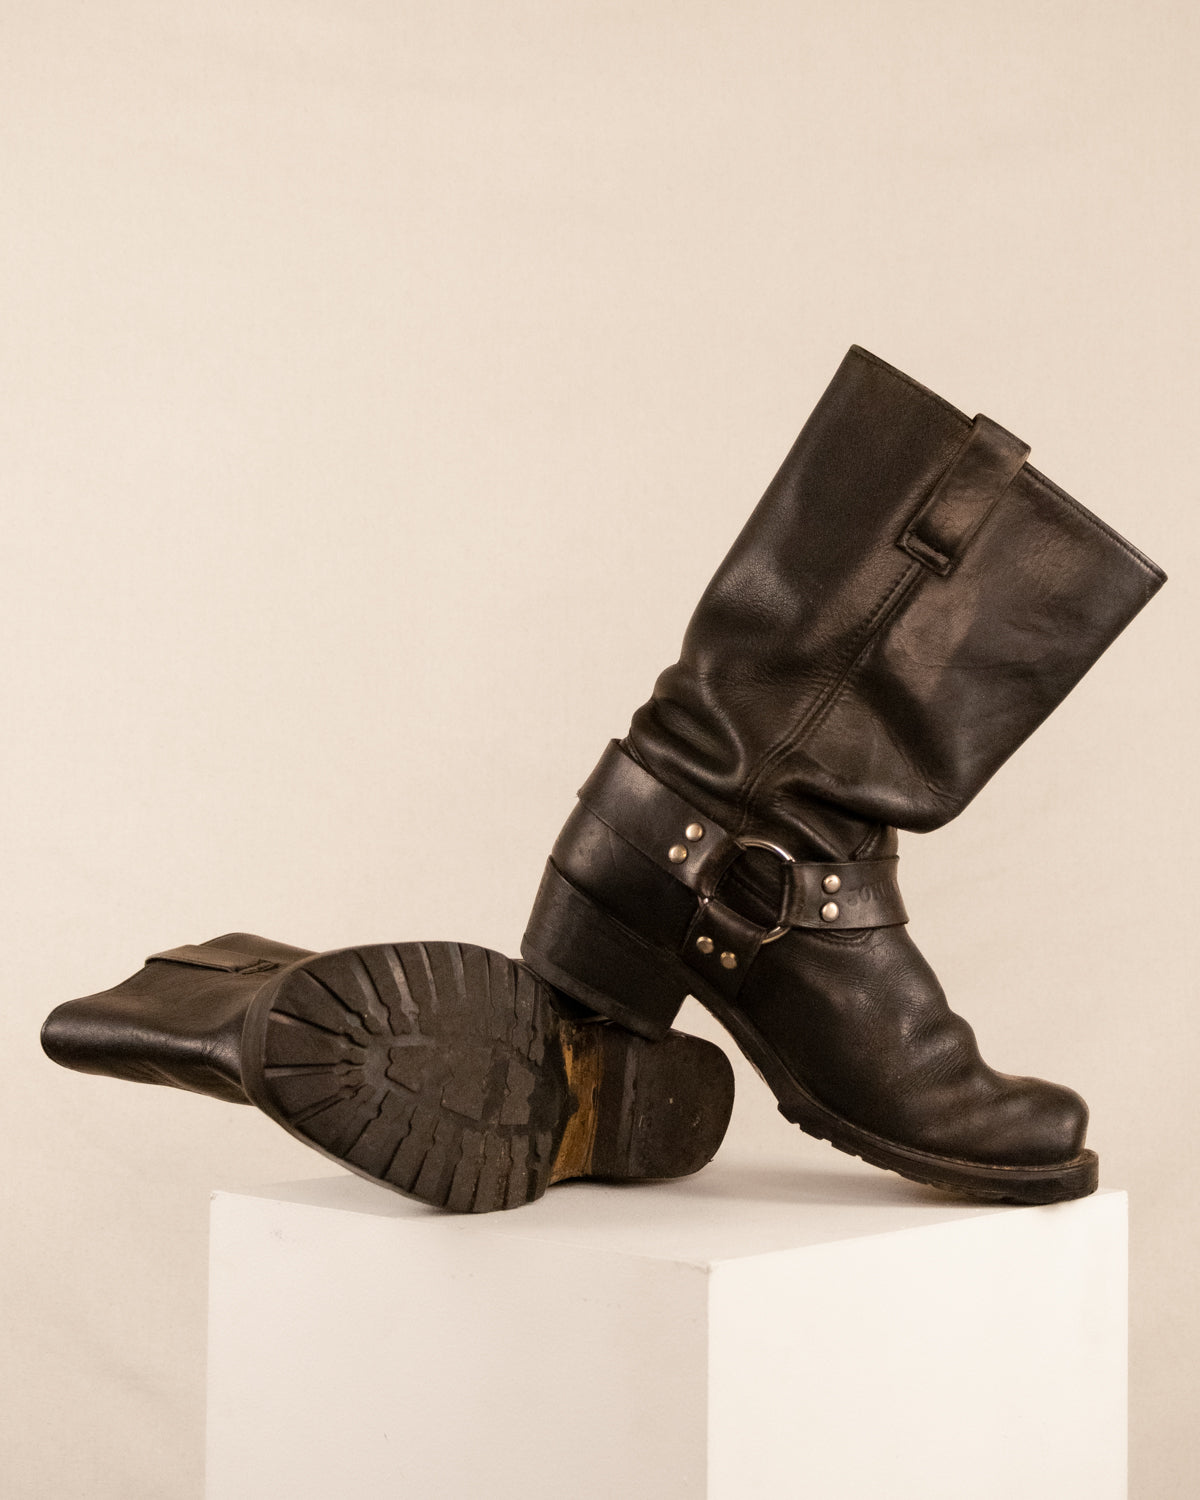 Johnny Reb Motorcycle Boots 9.5M